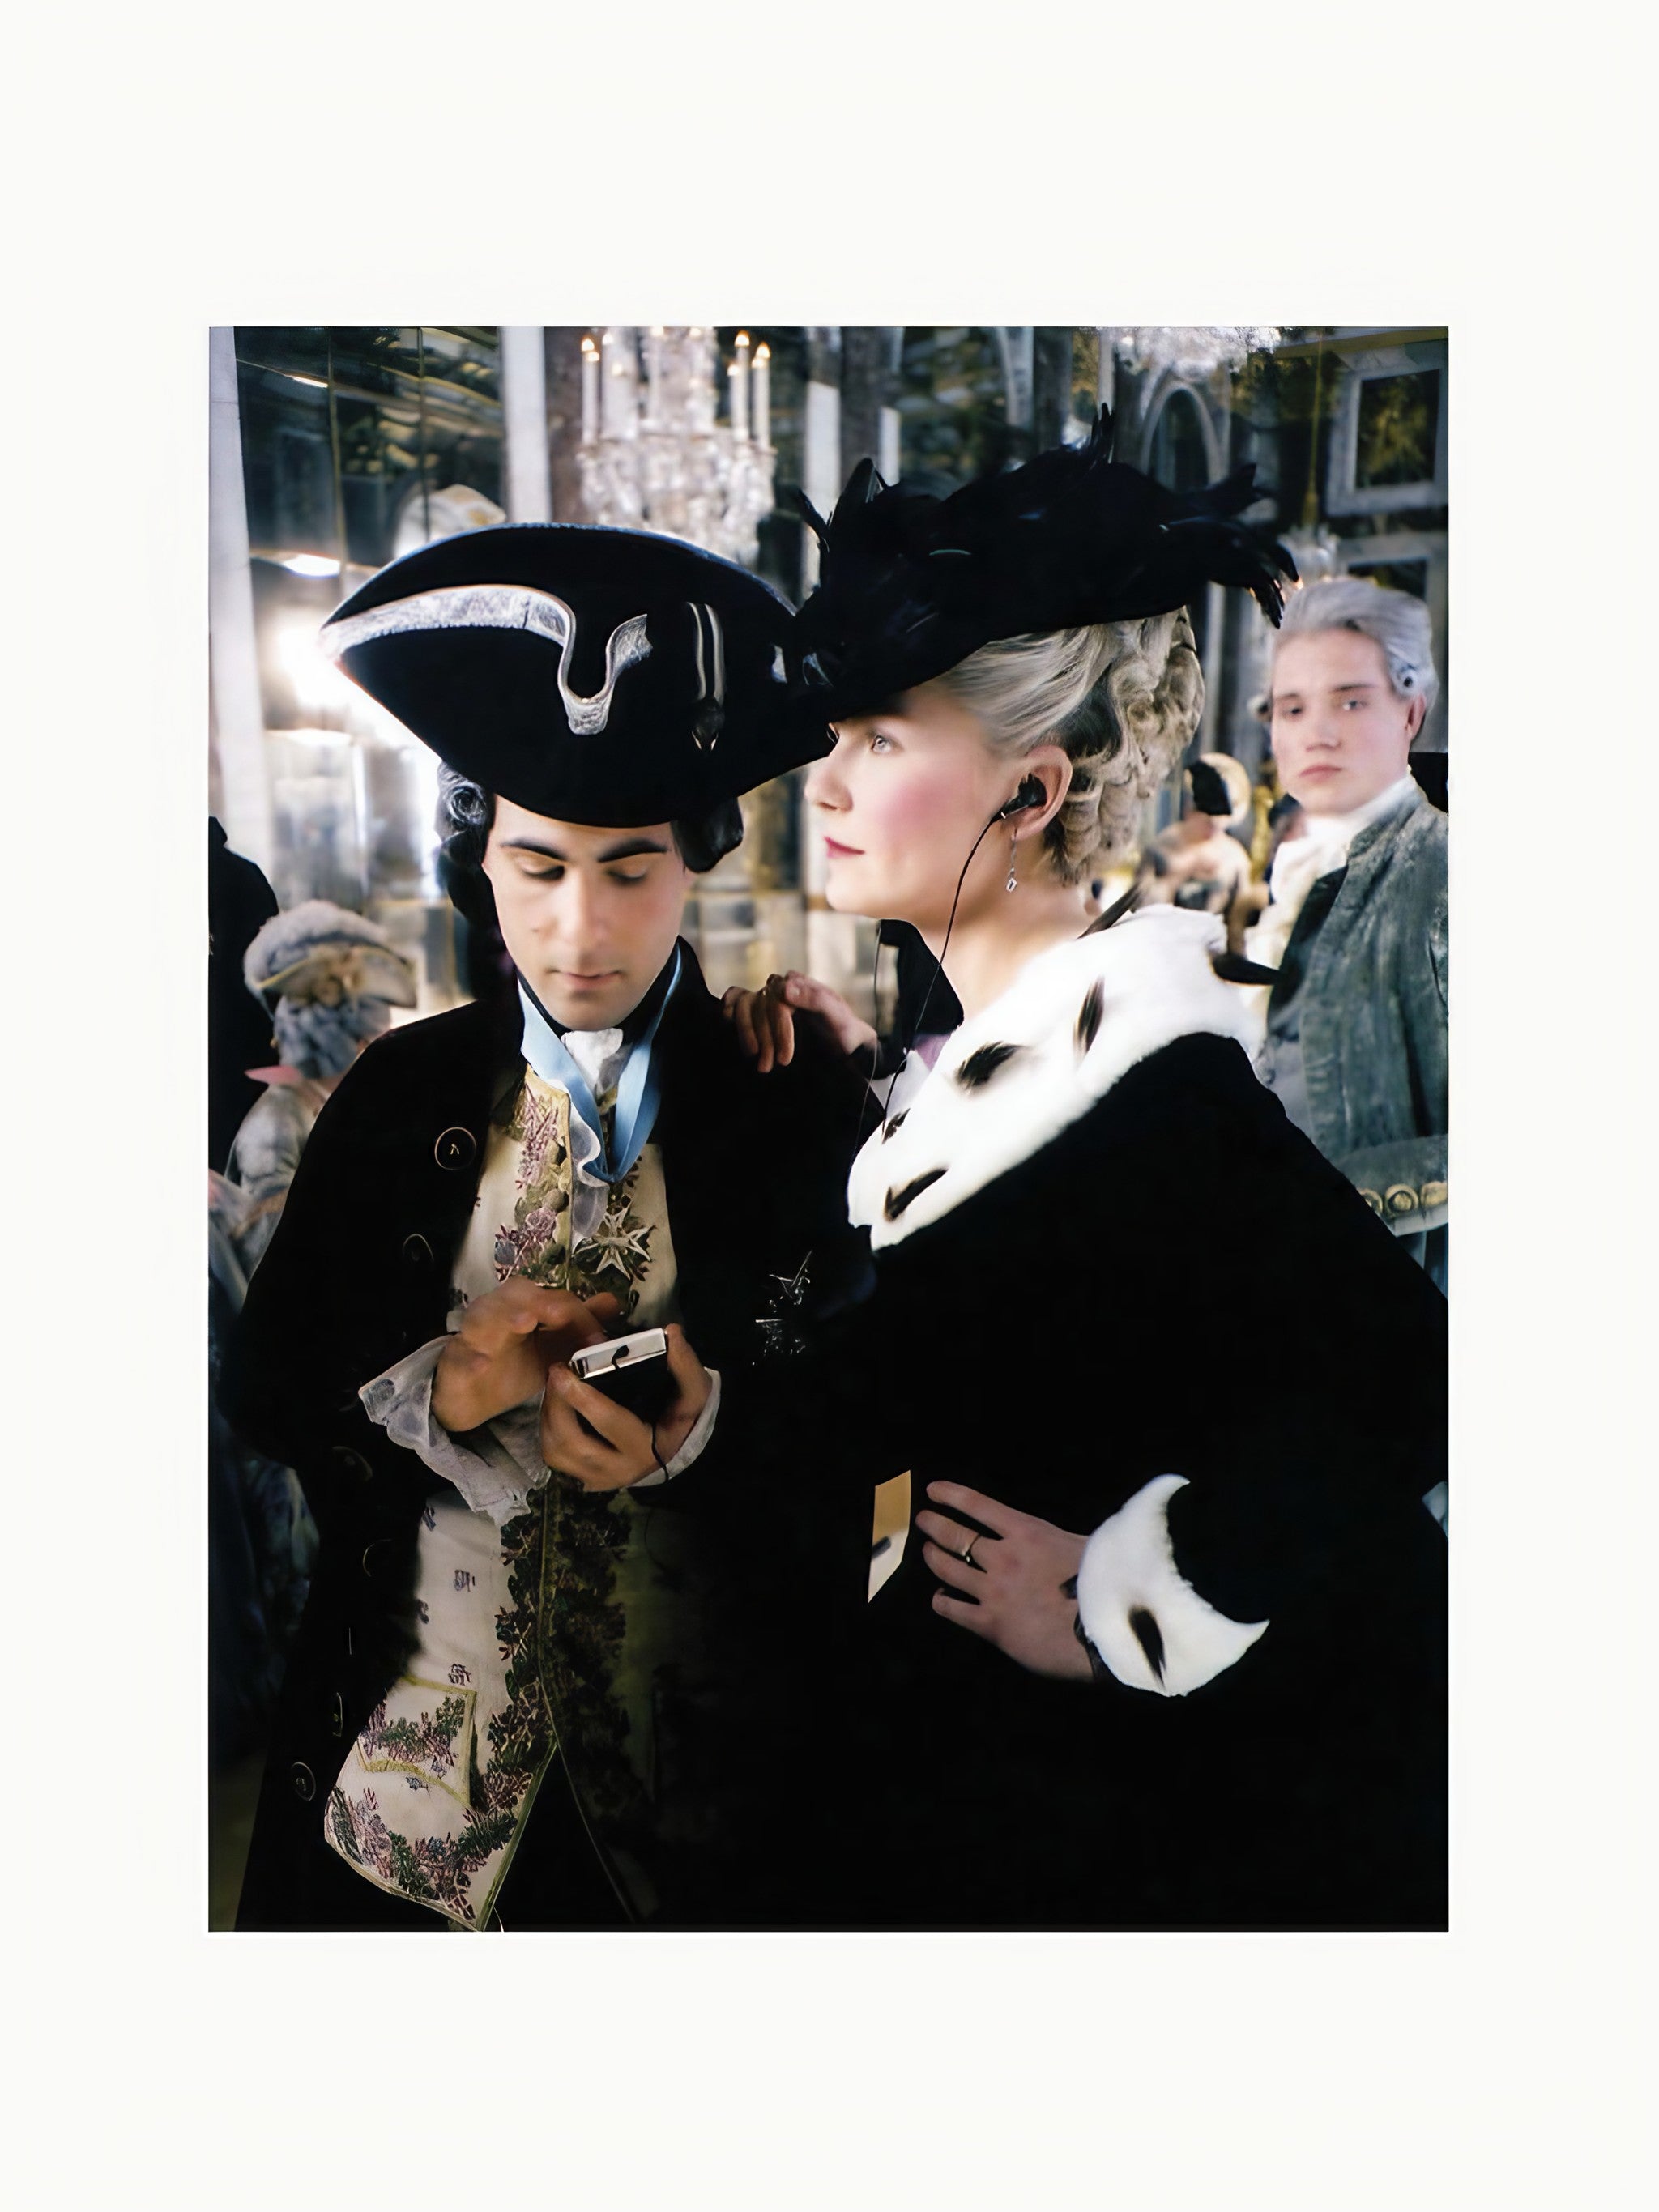 A historical reenactment scene depicting two individuals in 18th-century attire, one holding a Archive Sofia Coppola mask inspired by "Lost in Translation" and the other a small bouquet, surrounded by other costumed Maison Plage.